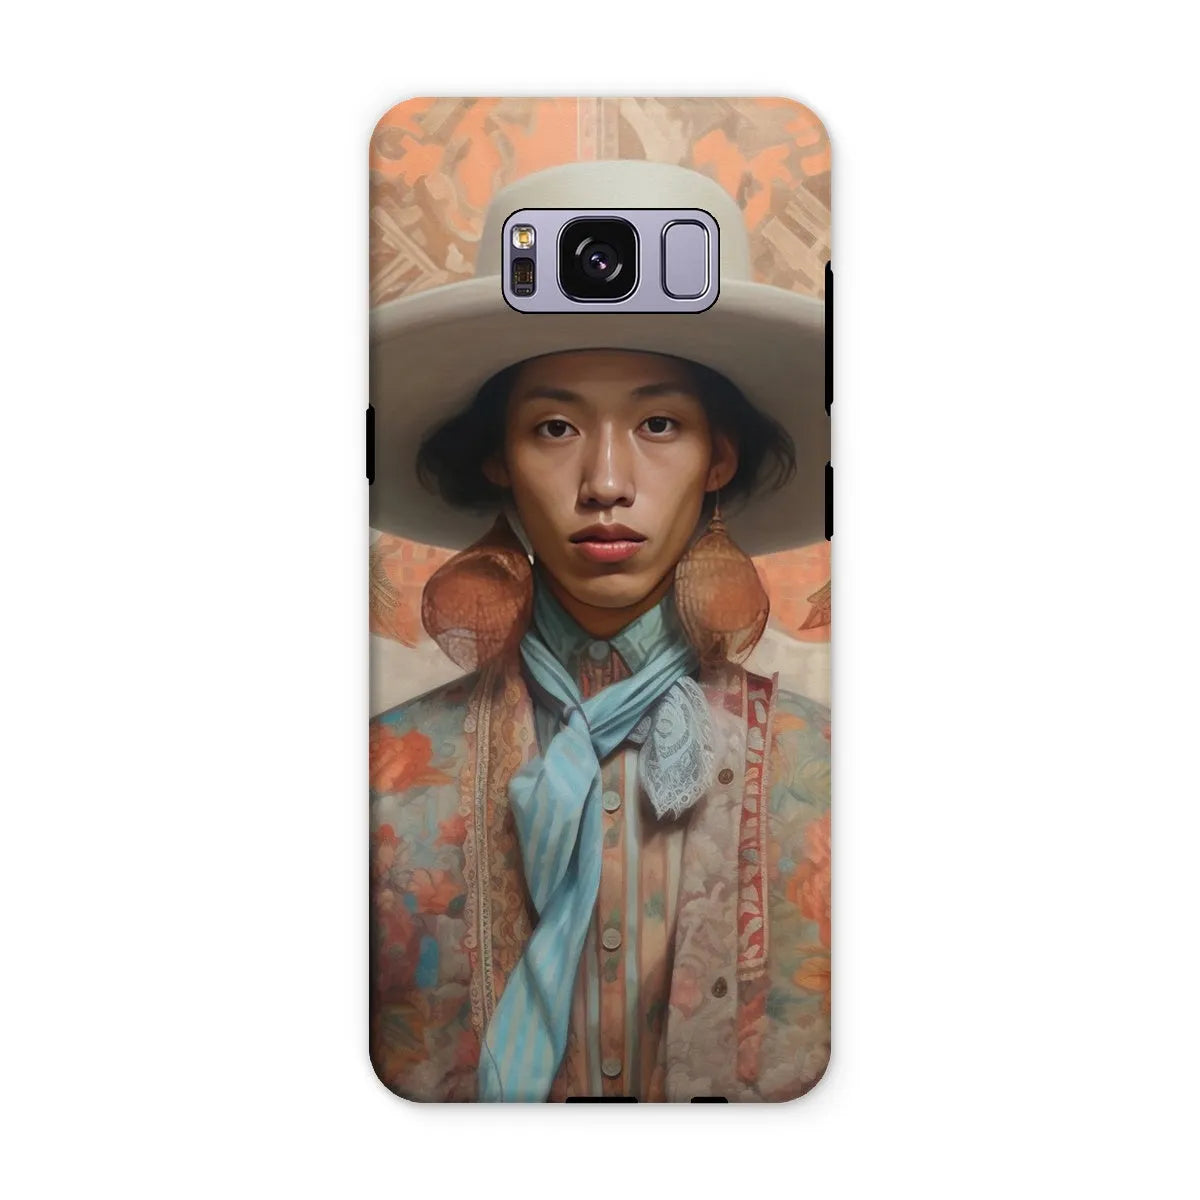 Iyaan The Gay Cowboy - Dandy Gay Aesthetic Art Phone Case - Samsung Galaxy S8 Plus / Matte - Mobile Phone Cases